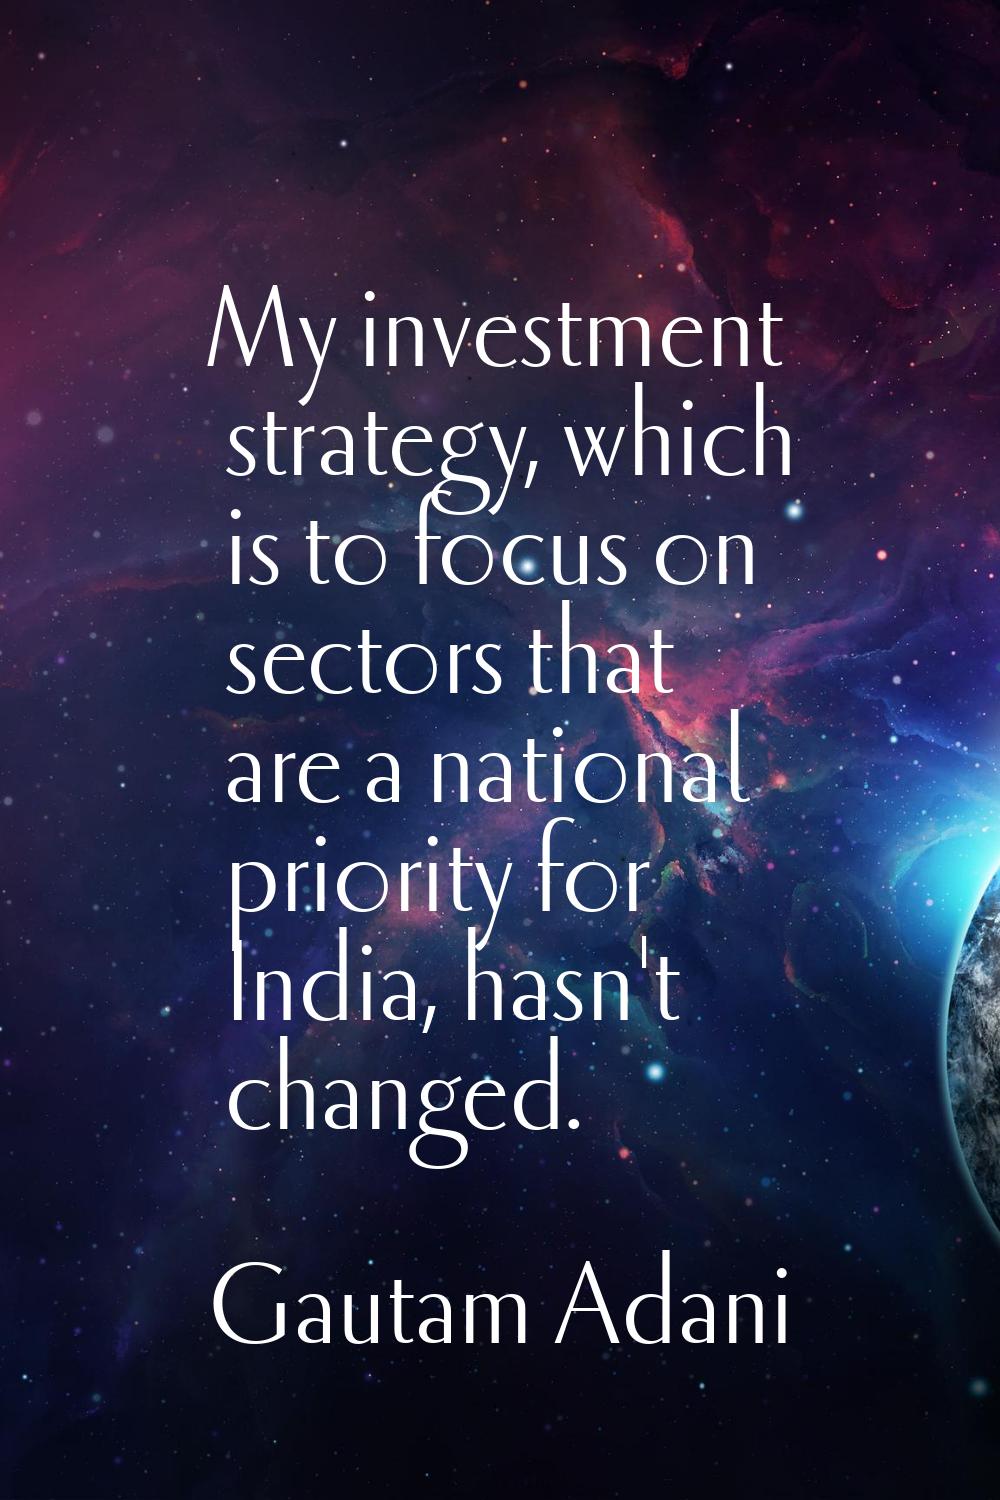 My investment strategy, which is to focus on sectors that are a national priority for India, hasn't